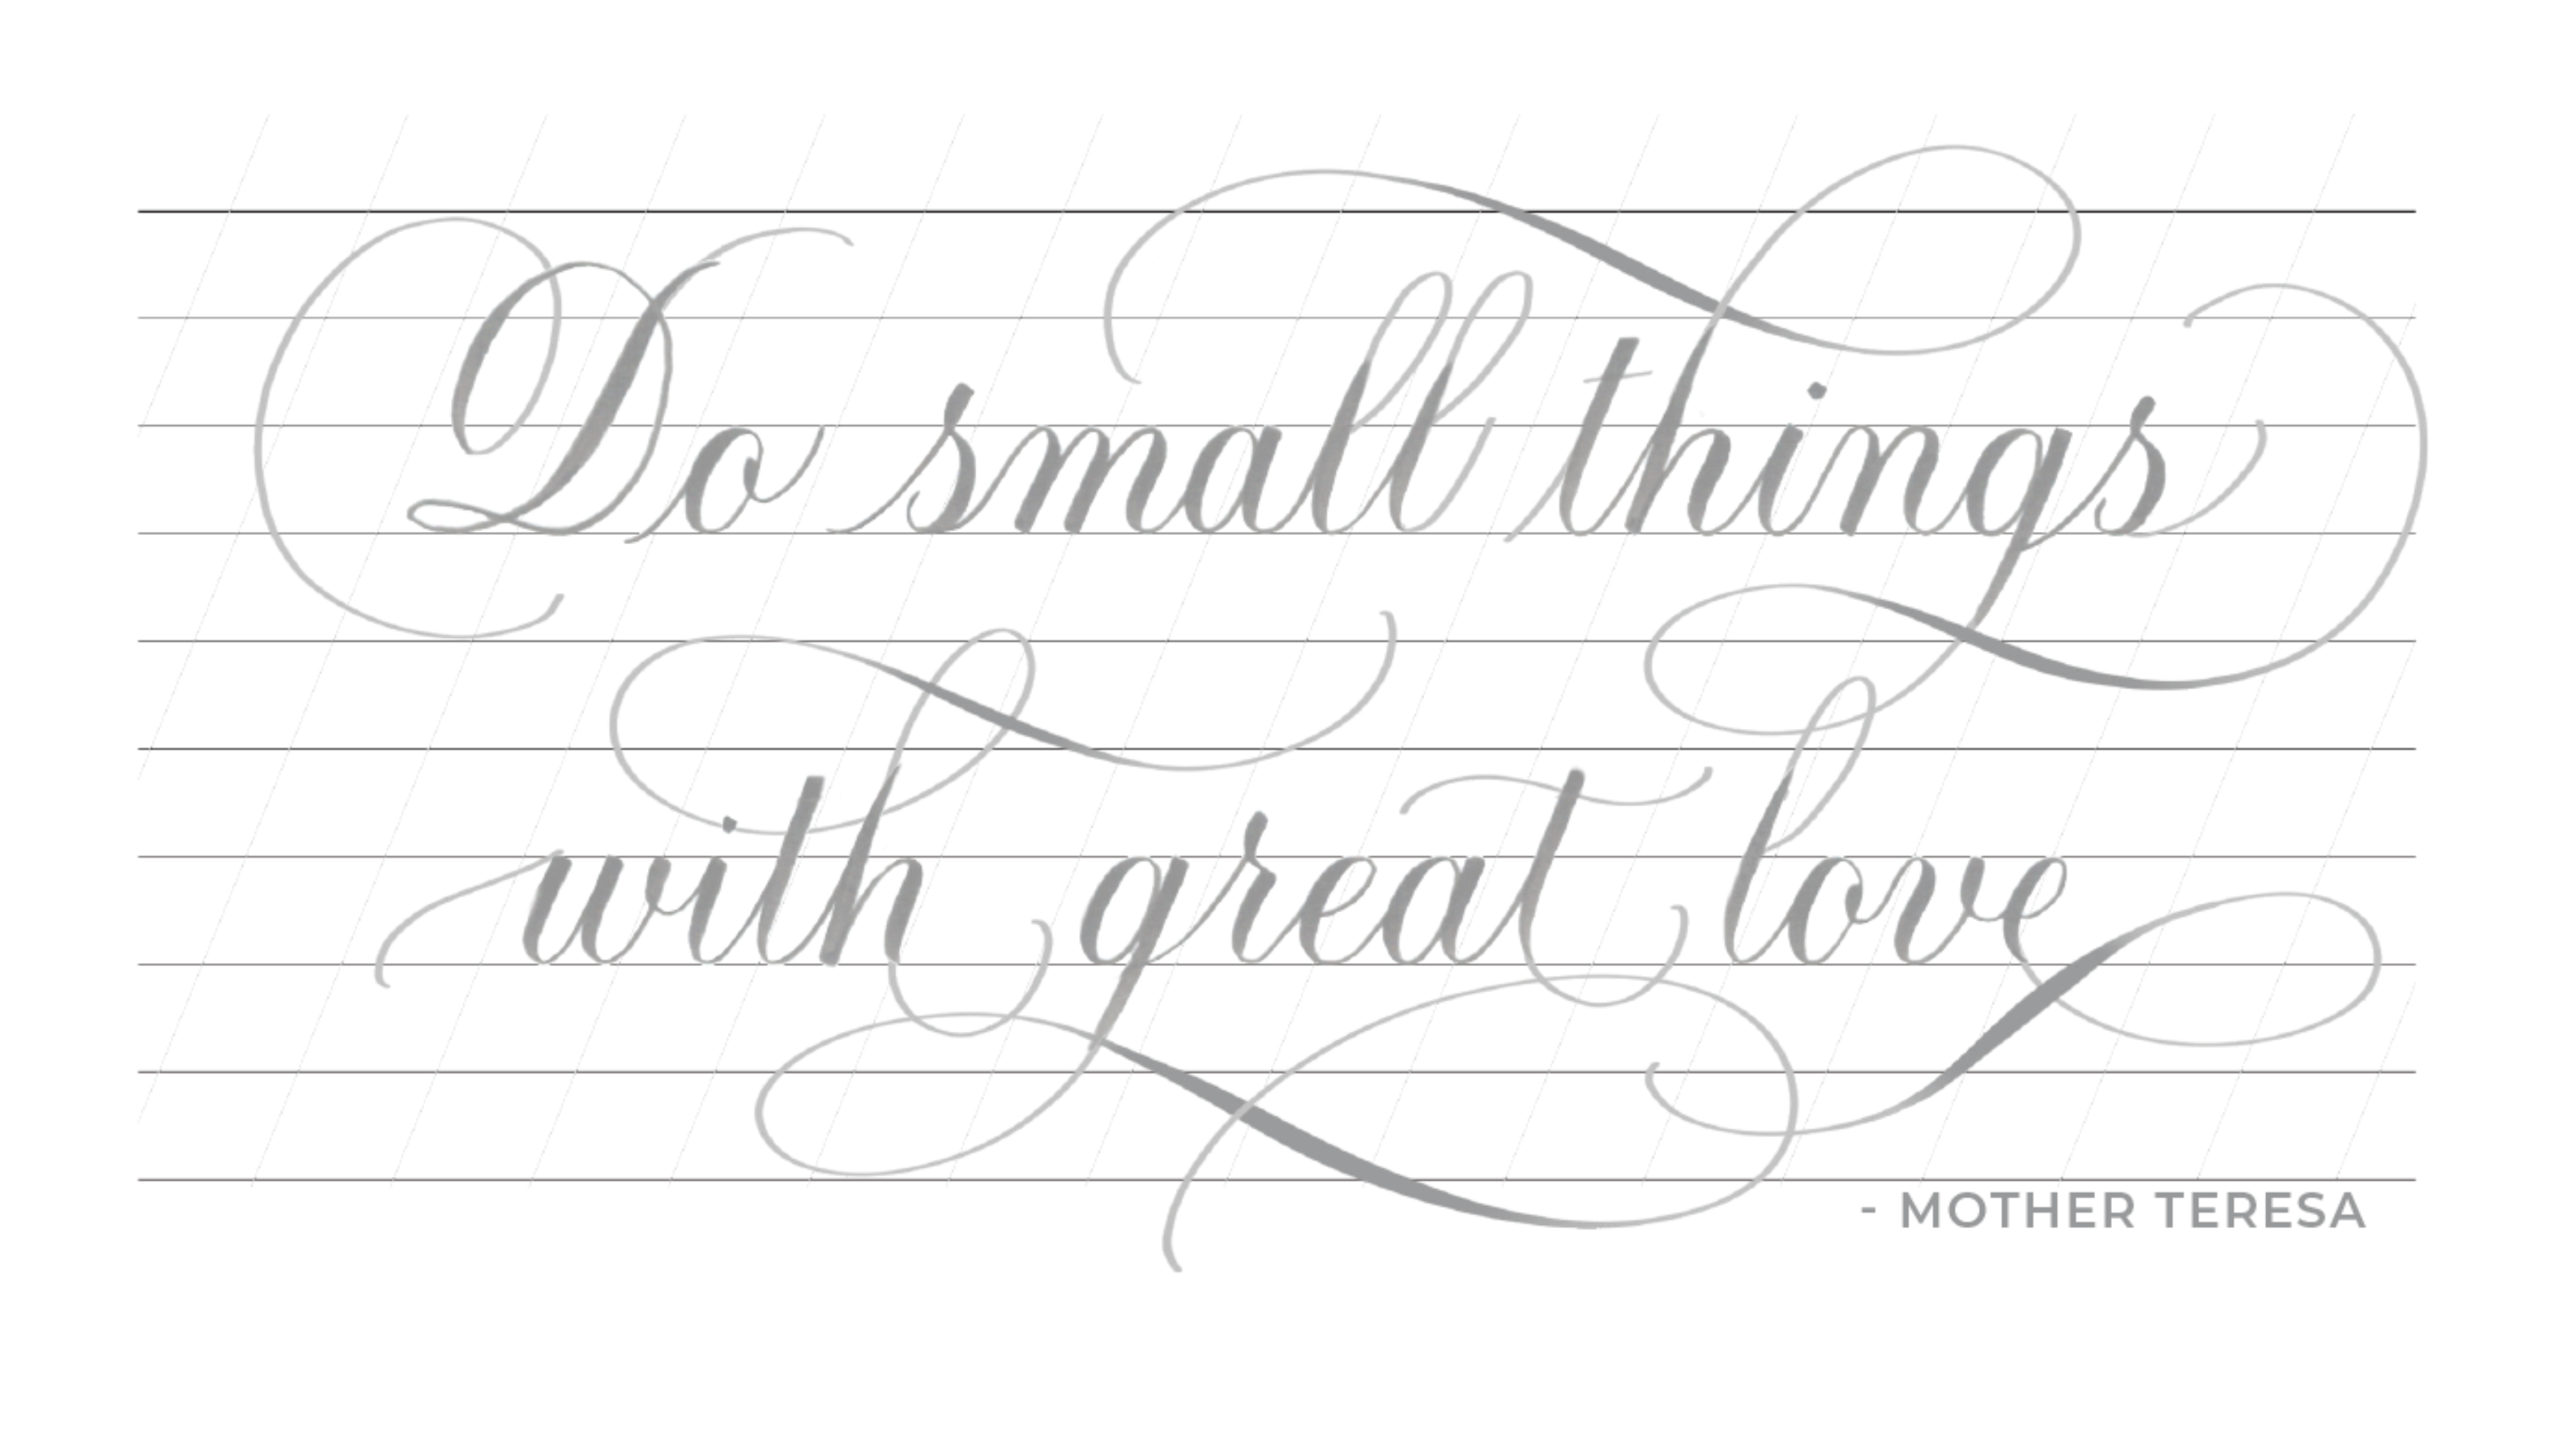 Calligraphy quote with flourishes: Do small things with great love